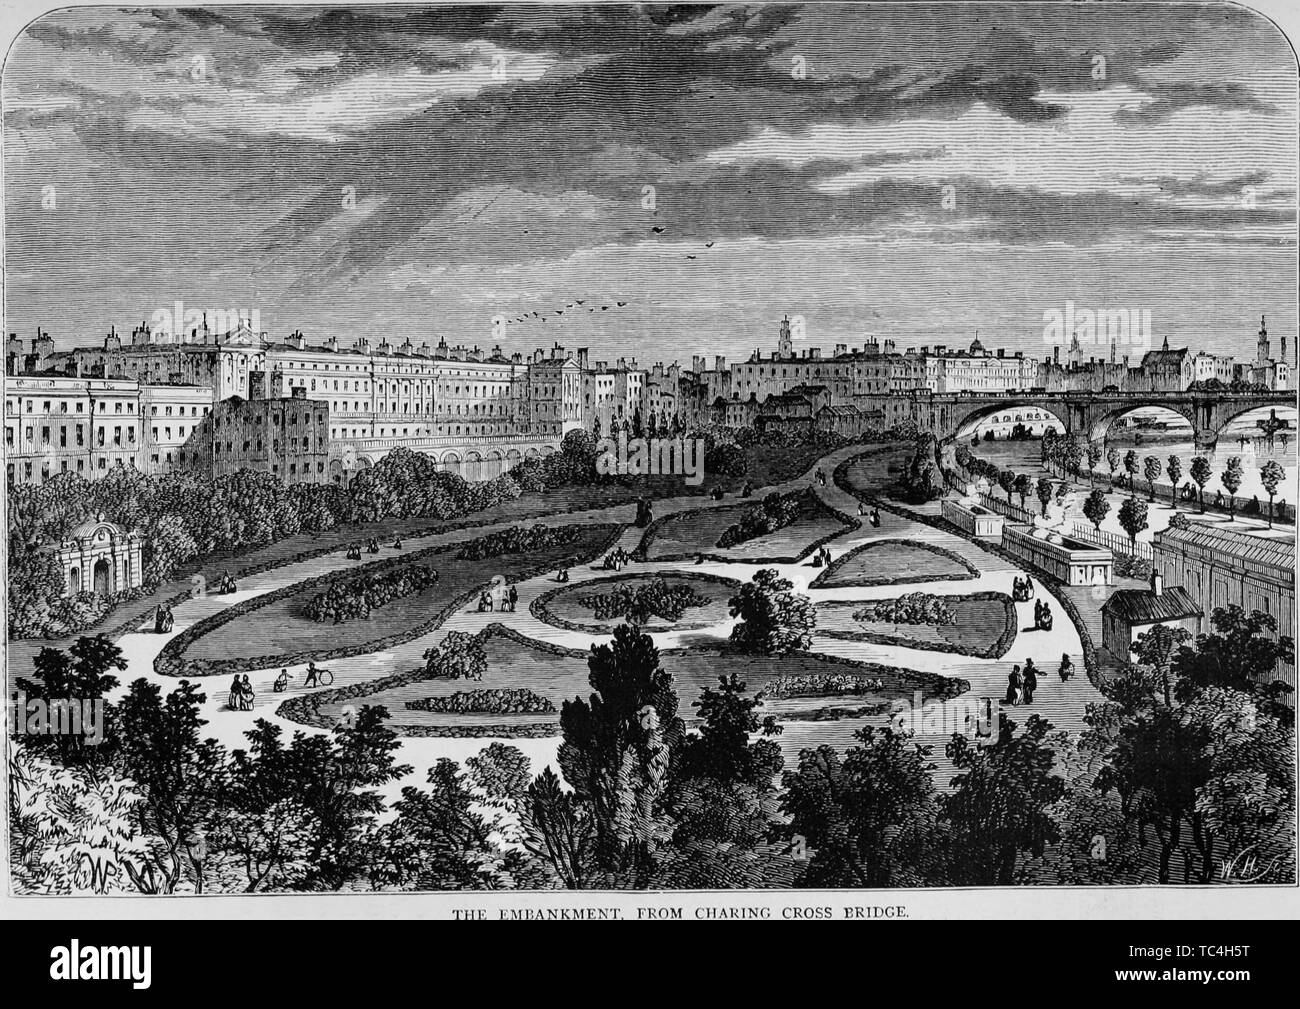 Engraving of the Embankment Gardens at Charing Cross, London, England, from the book 'Old and new London: a narrative of its history, its people, and its places' by Thornbury Walter, 1873. Courtesy Internet Archive. () Stock Photo